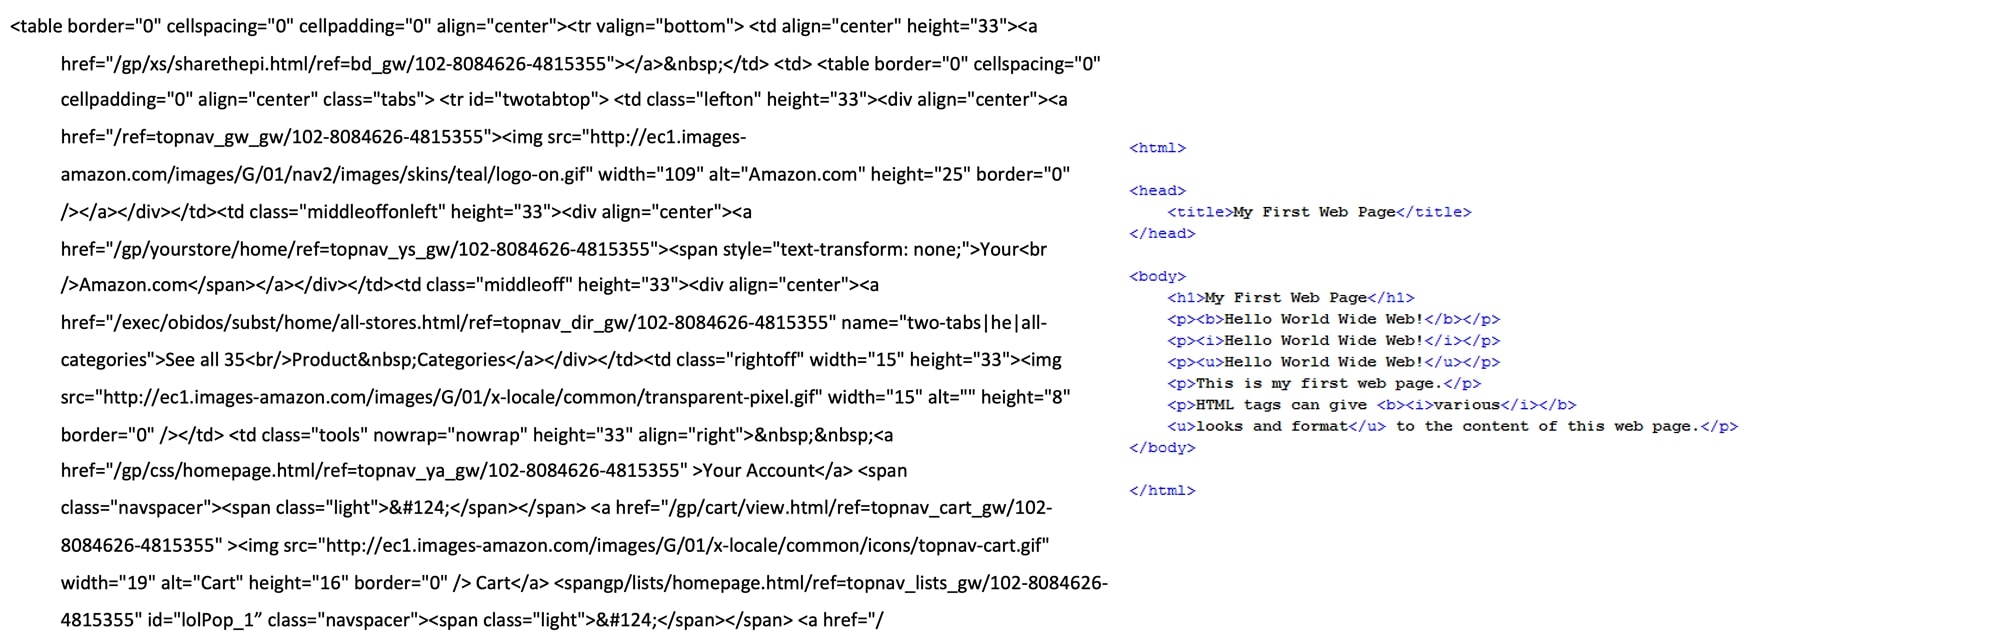 HTML code comparison between tag soup and clean code.